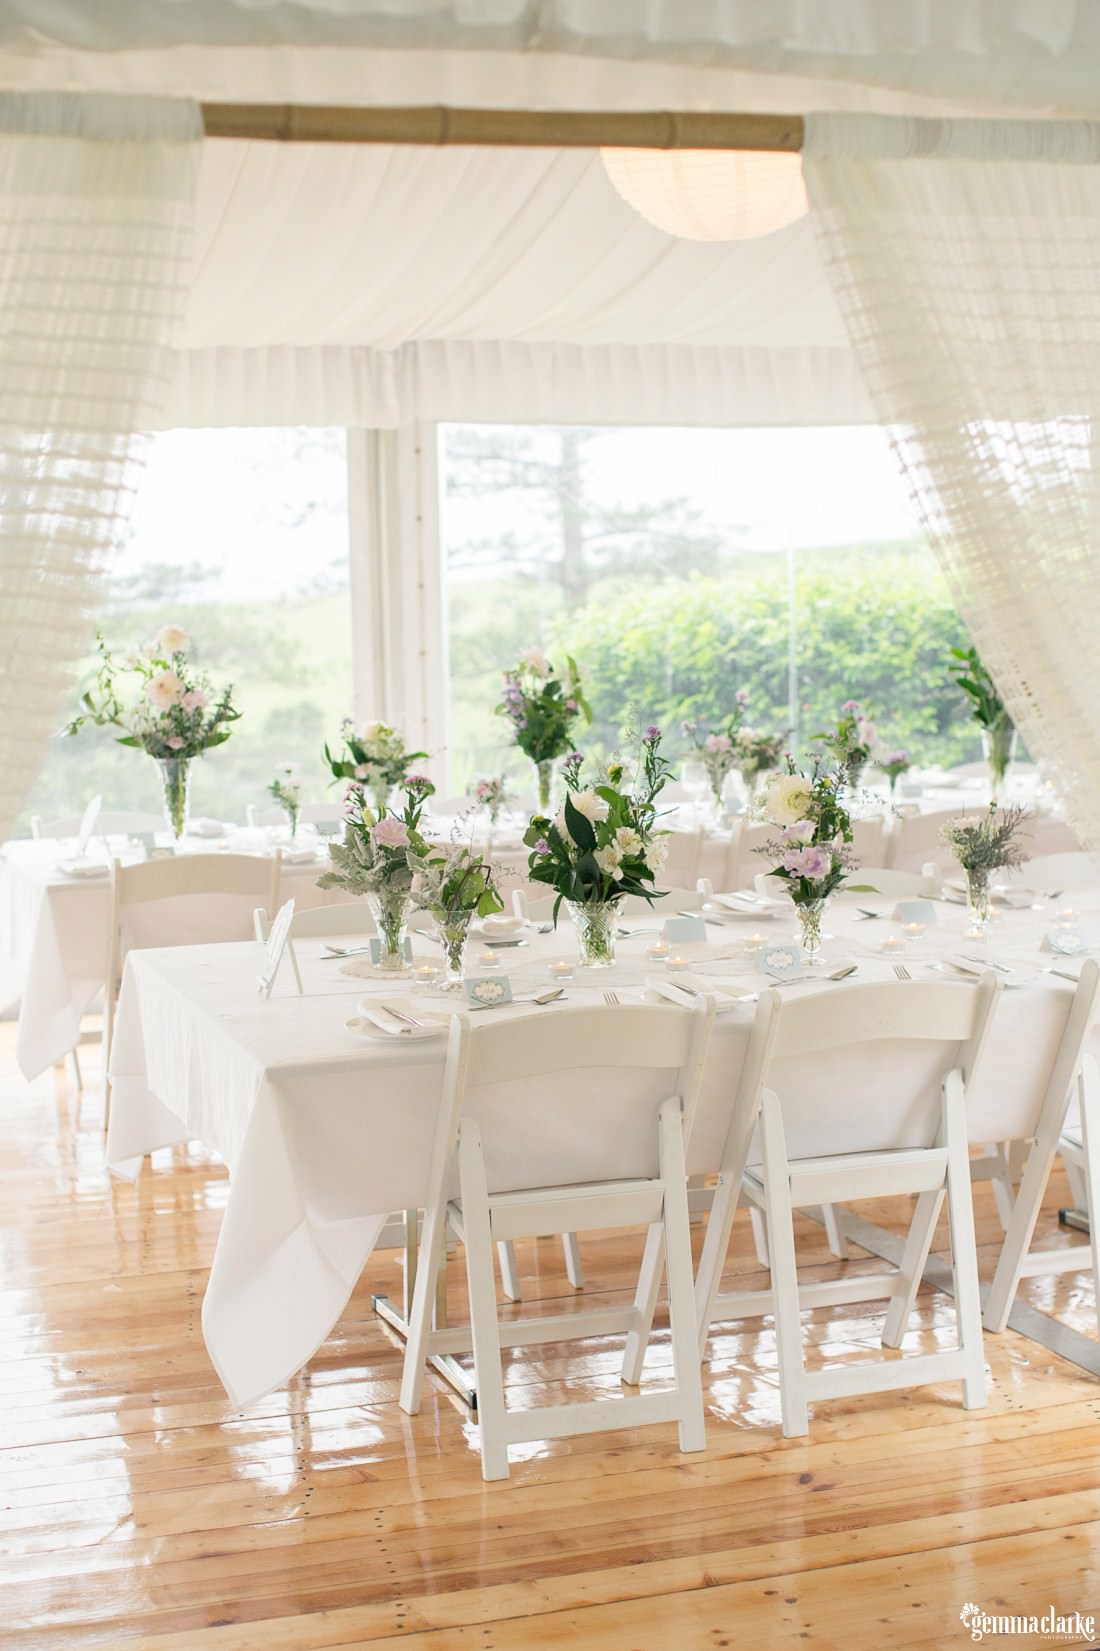 Sheer curtains framing the entrance to a marquee reception set with beautiful pastel flowers and white linen at this Bush Bank Wedding